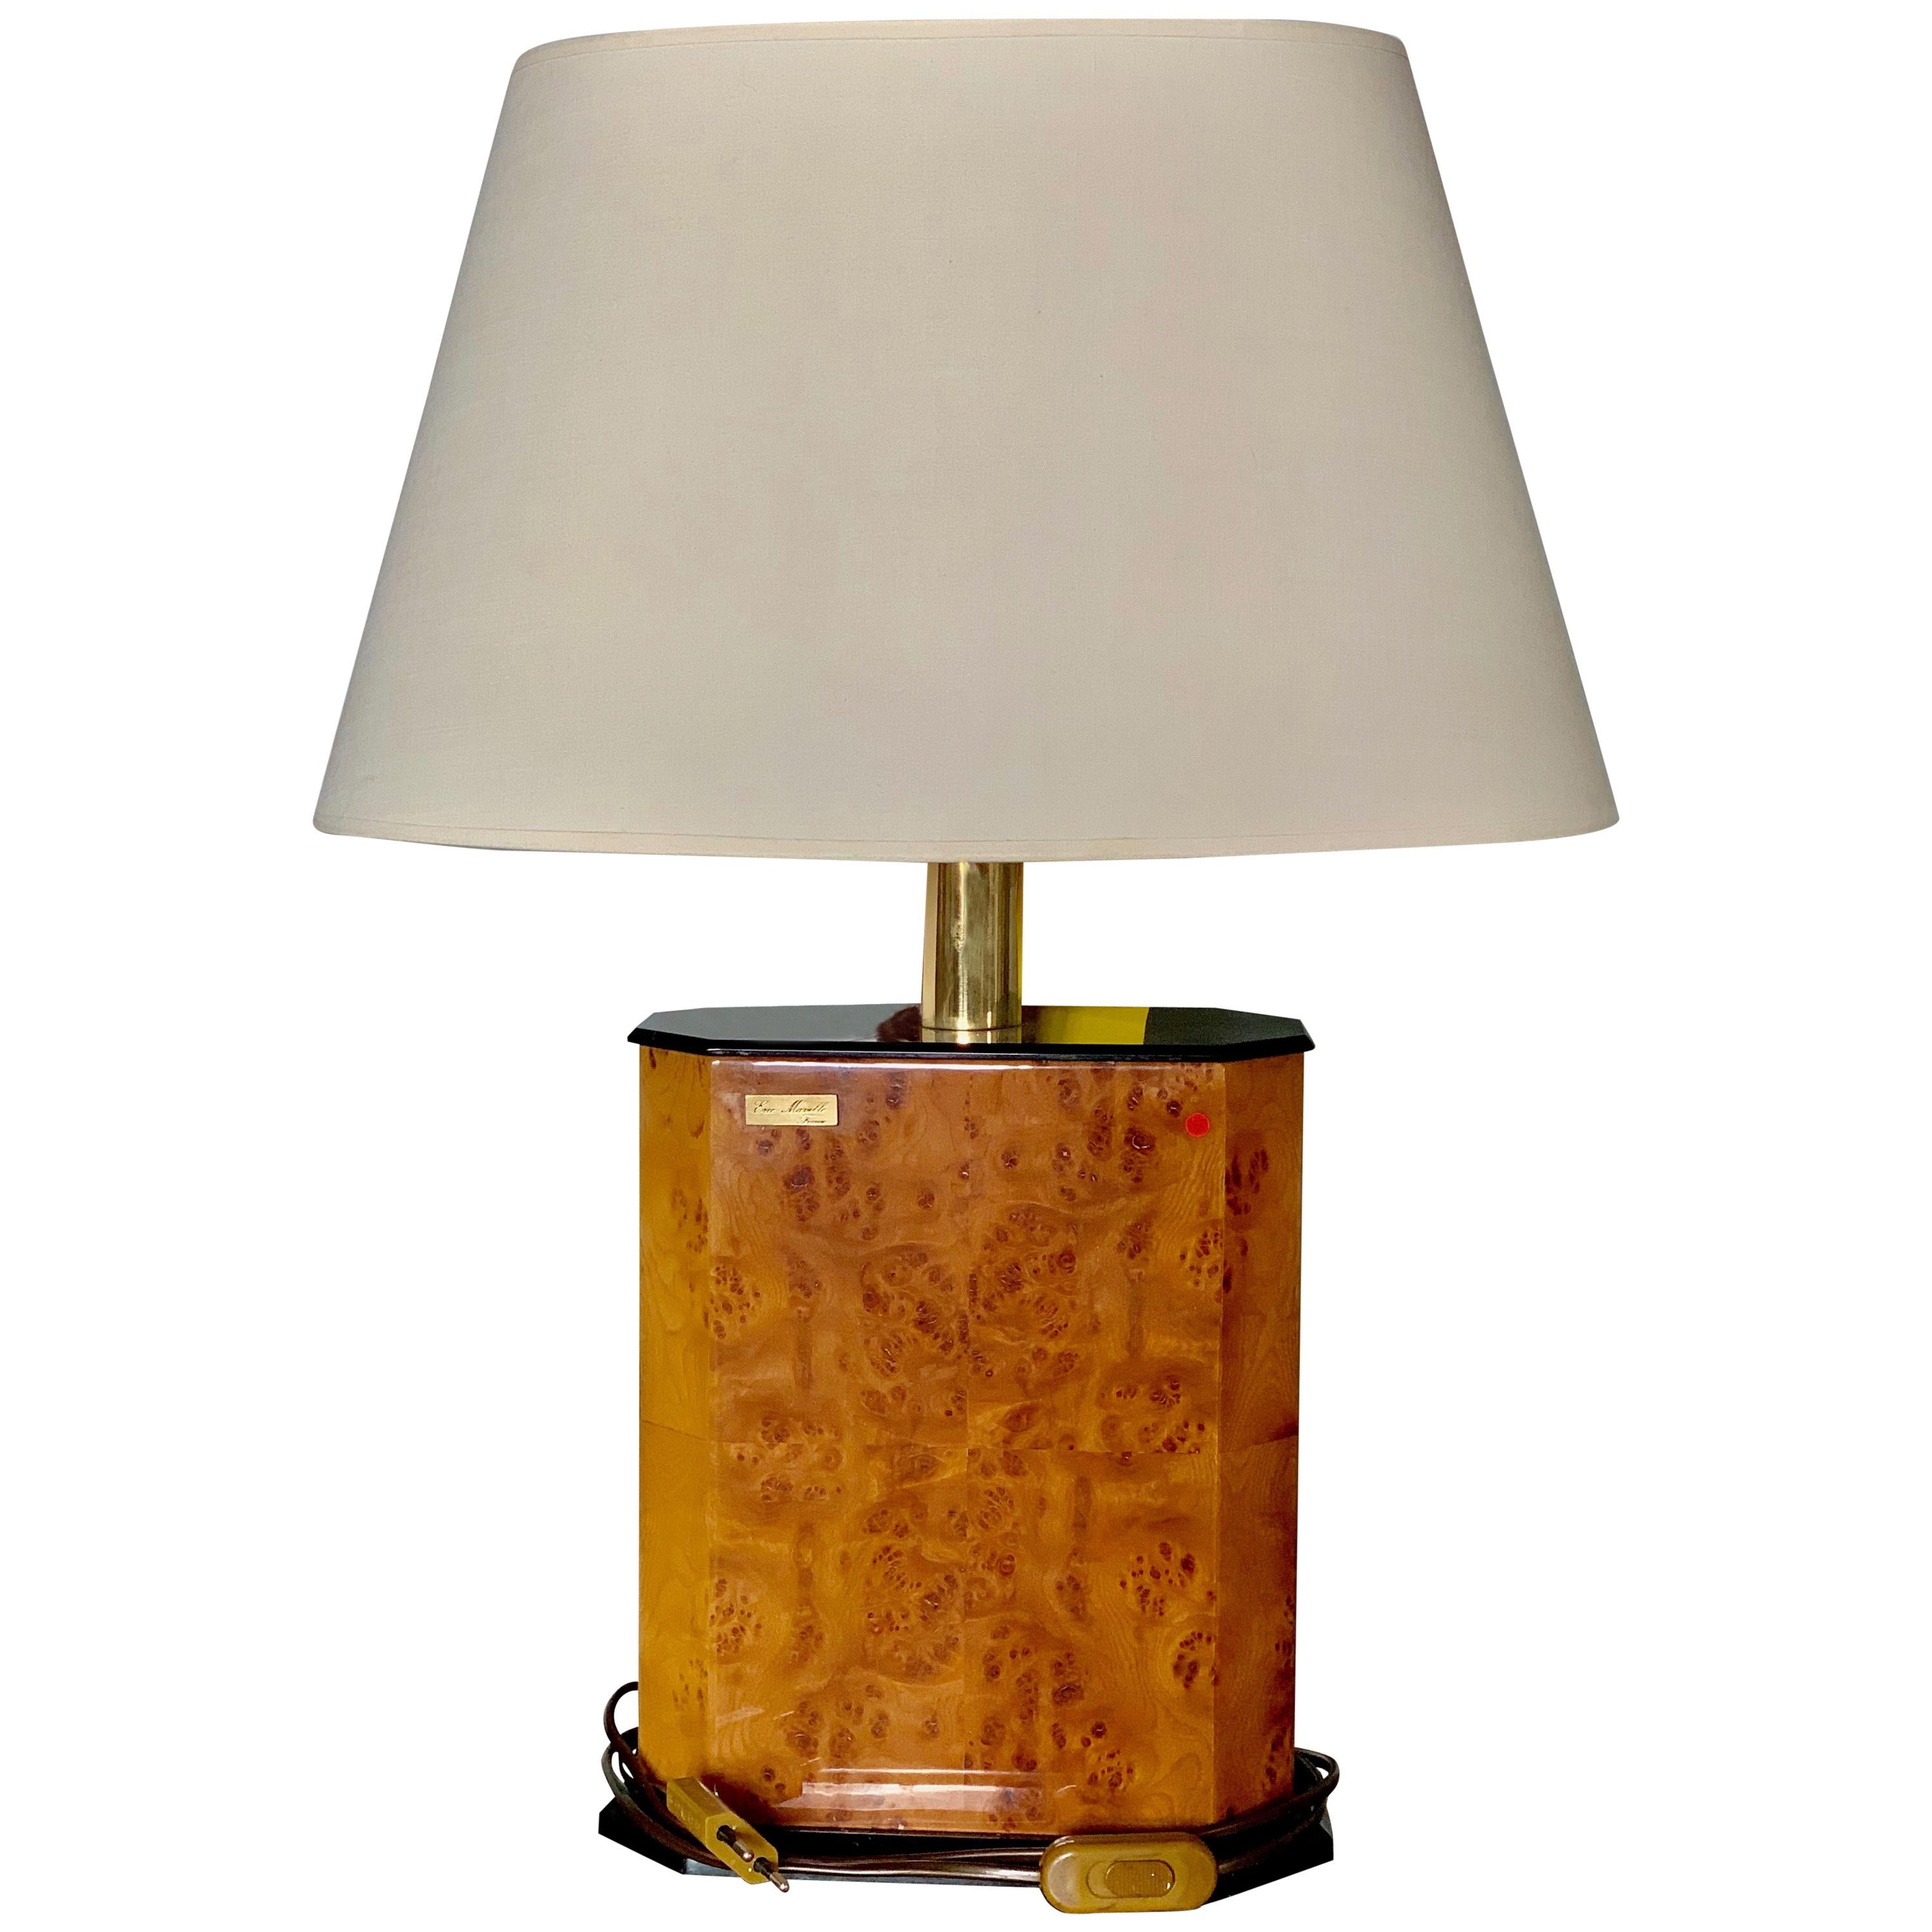 French Walnut Lamp with Brass Hardware and an Oval Shade, circa 1970